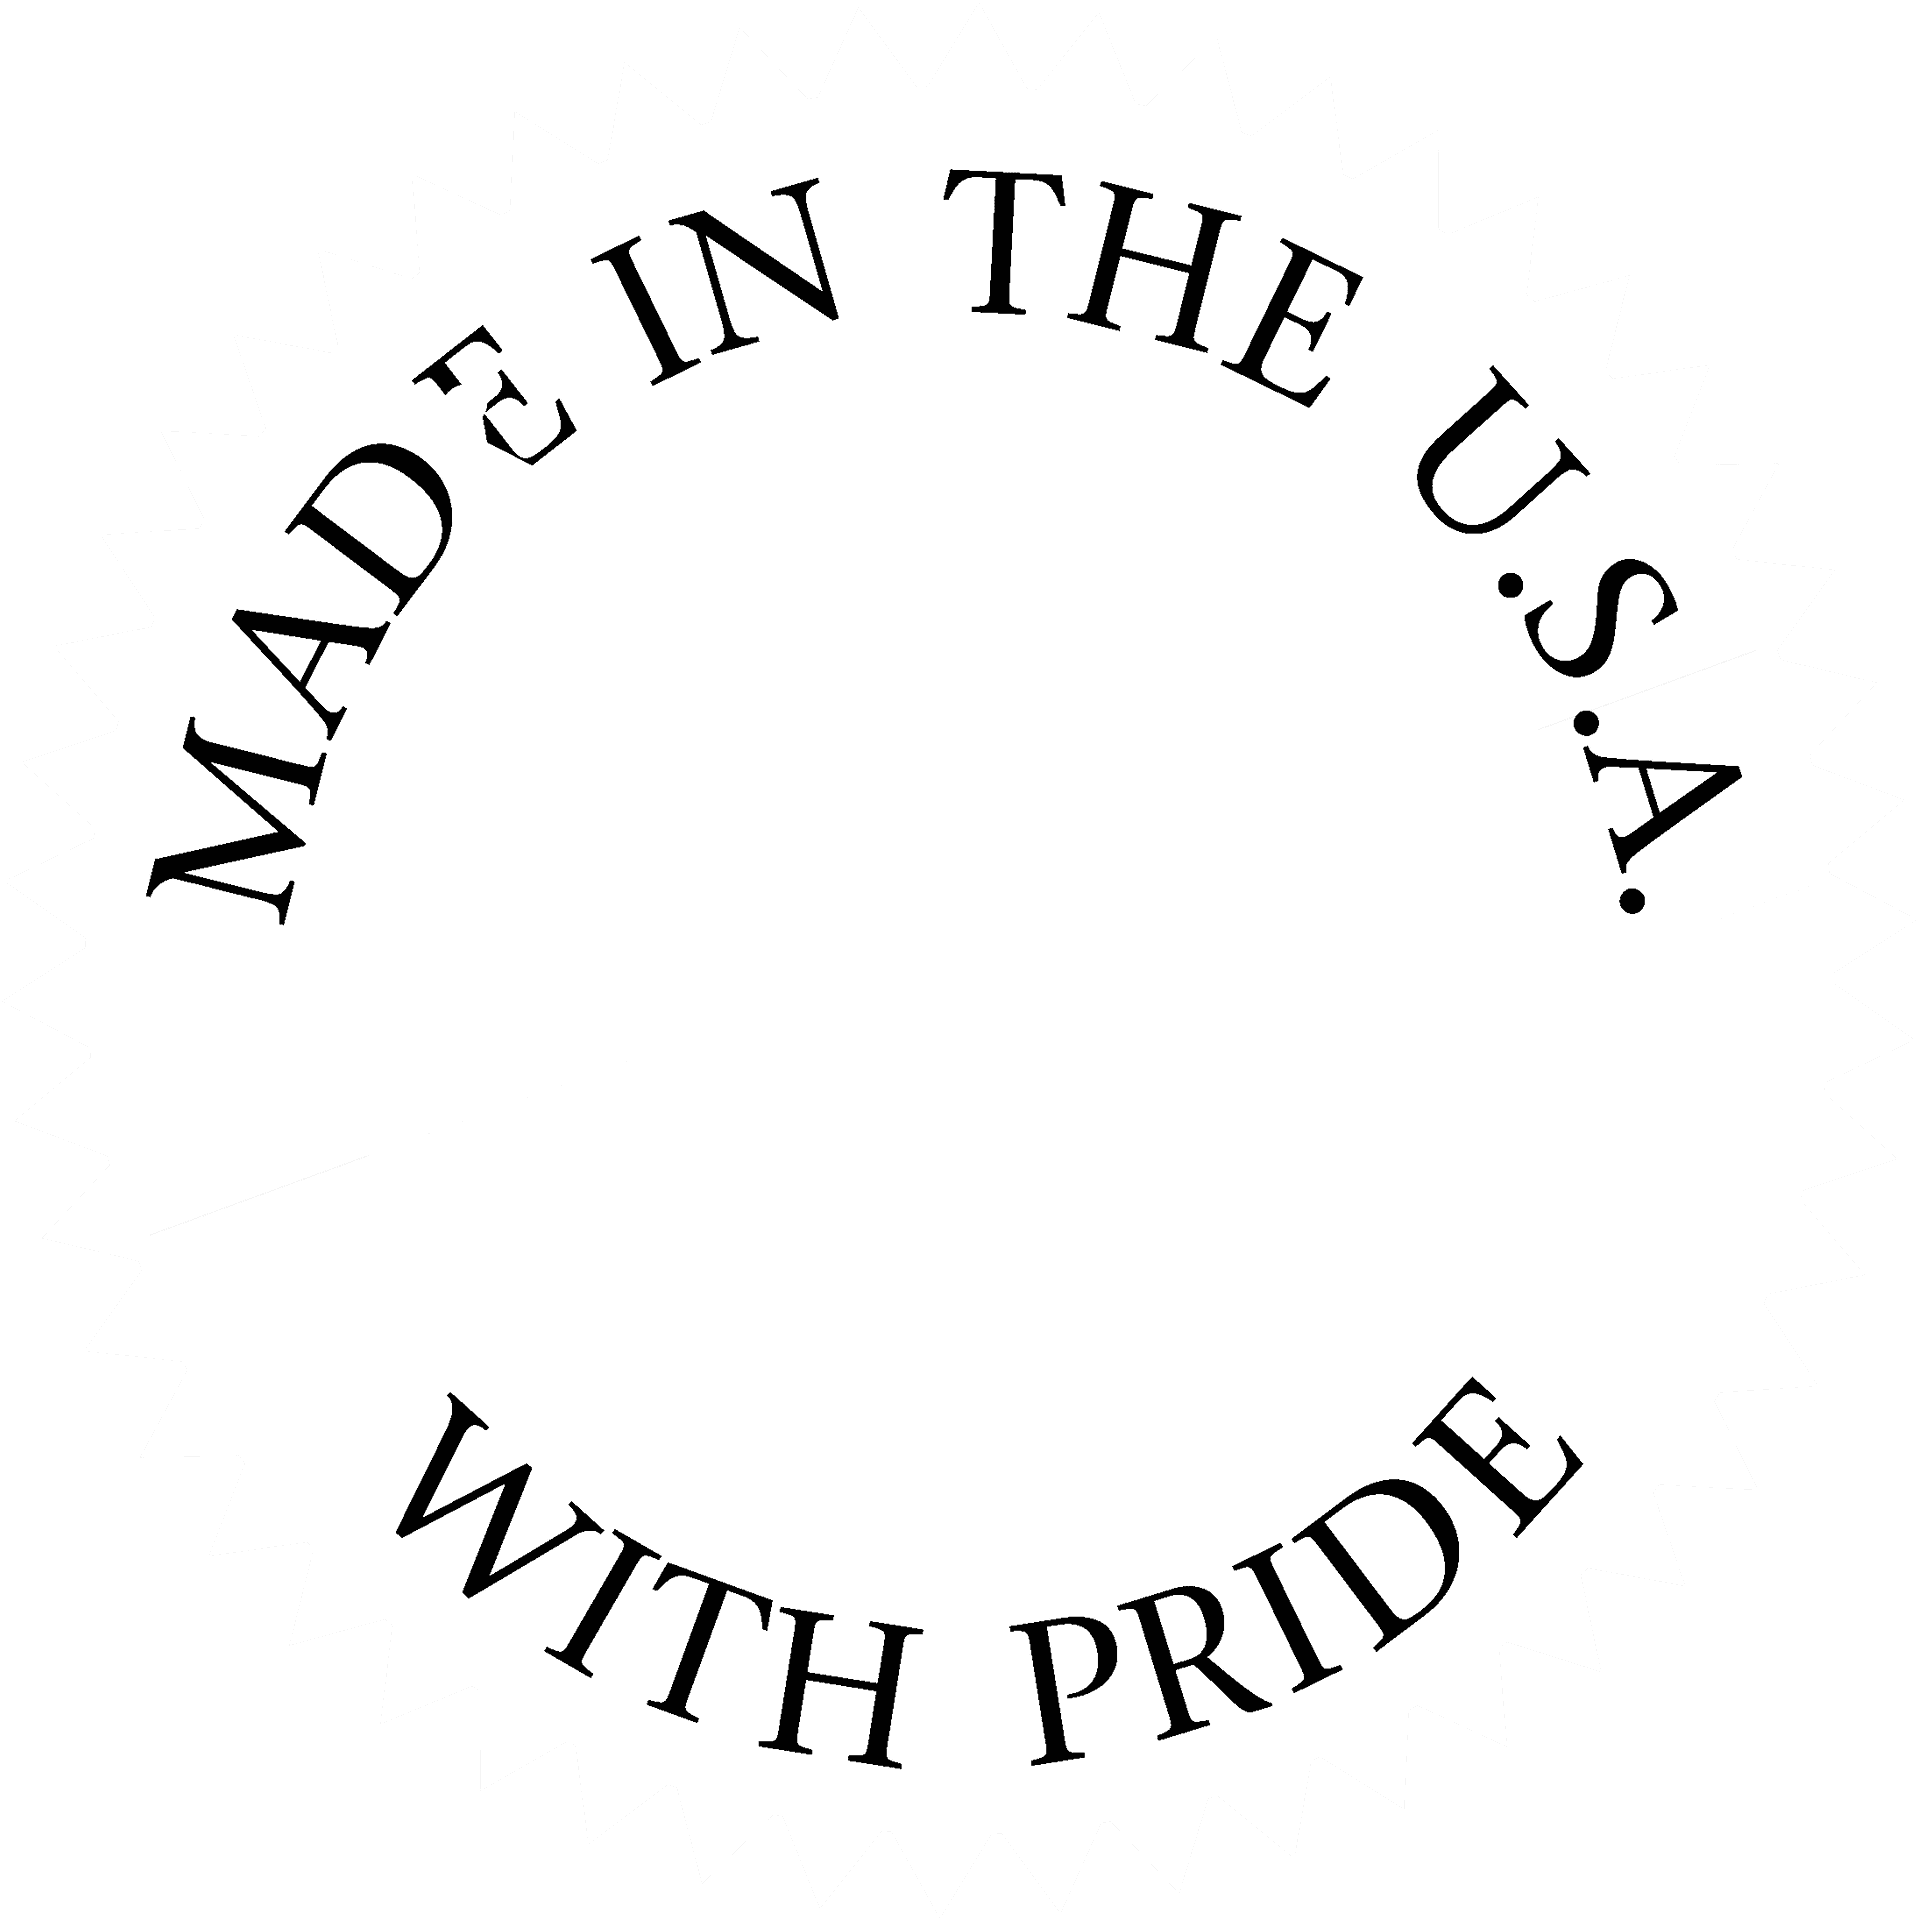 Madein U S A With Pride Seal PNG image